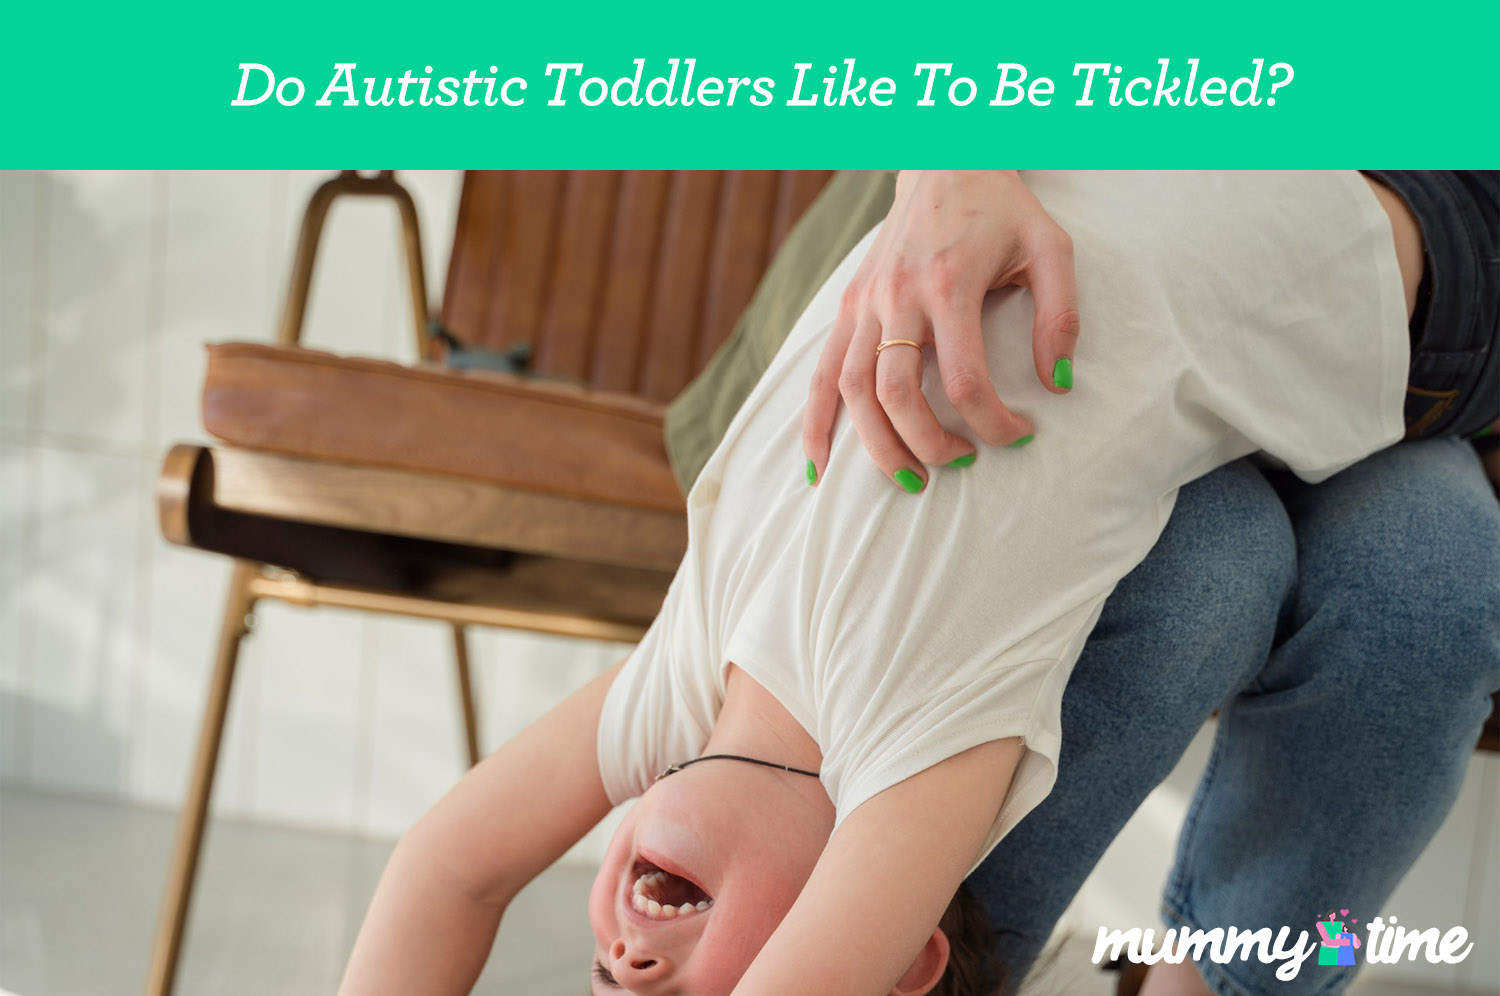 Do Autistic Toddlers Like To Be Tickled?